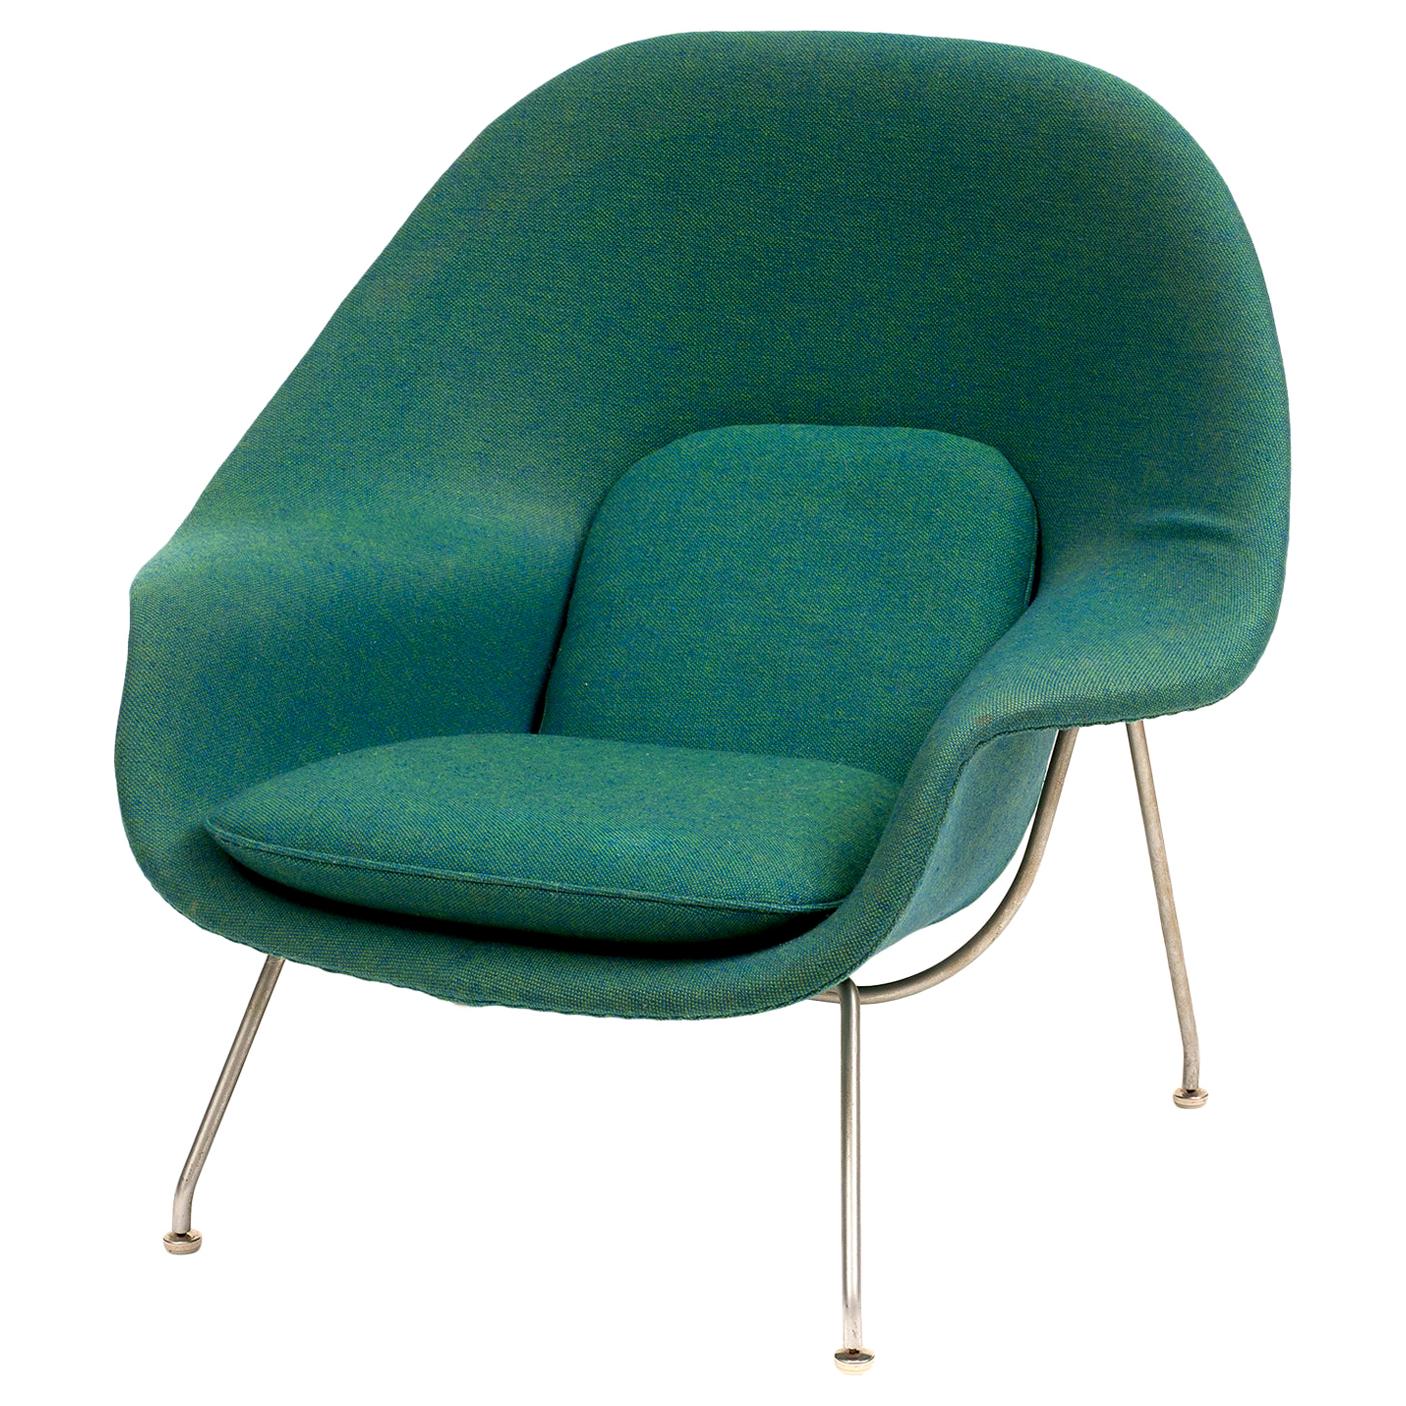 Womb Chair by Eero Saarinen for Knoll in Original Knoll Fabric, 1970s